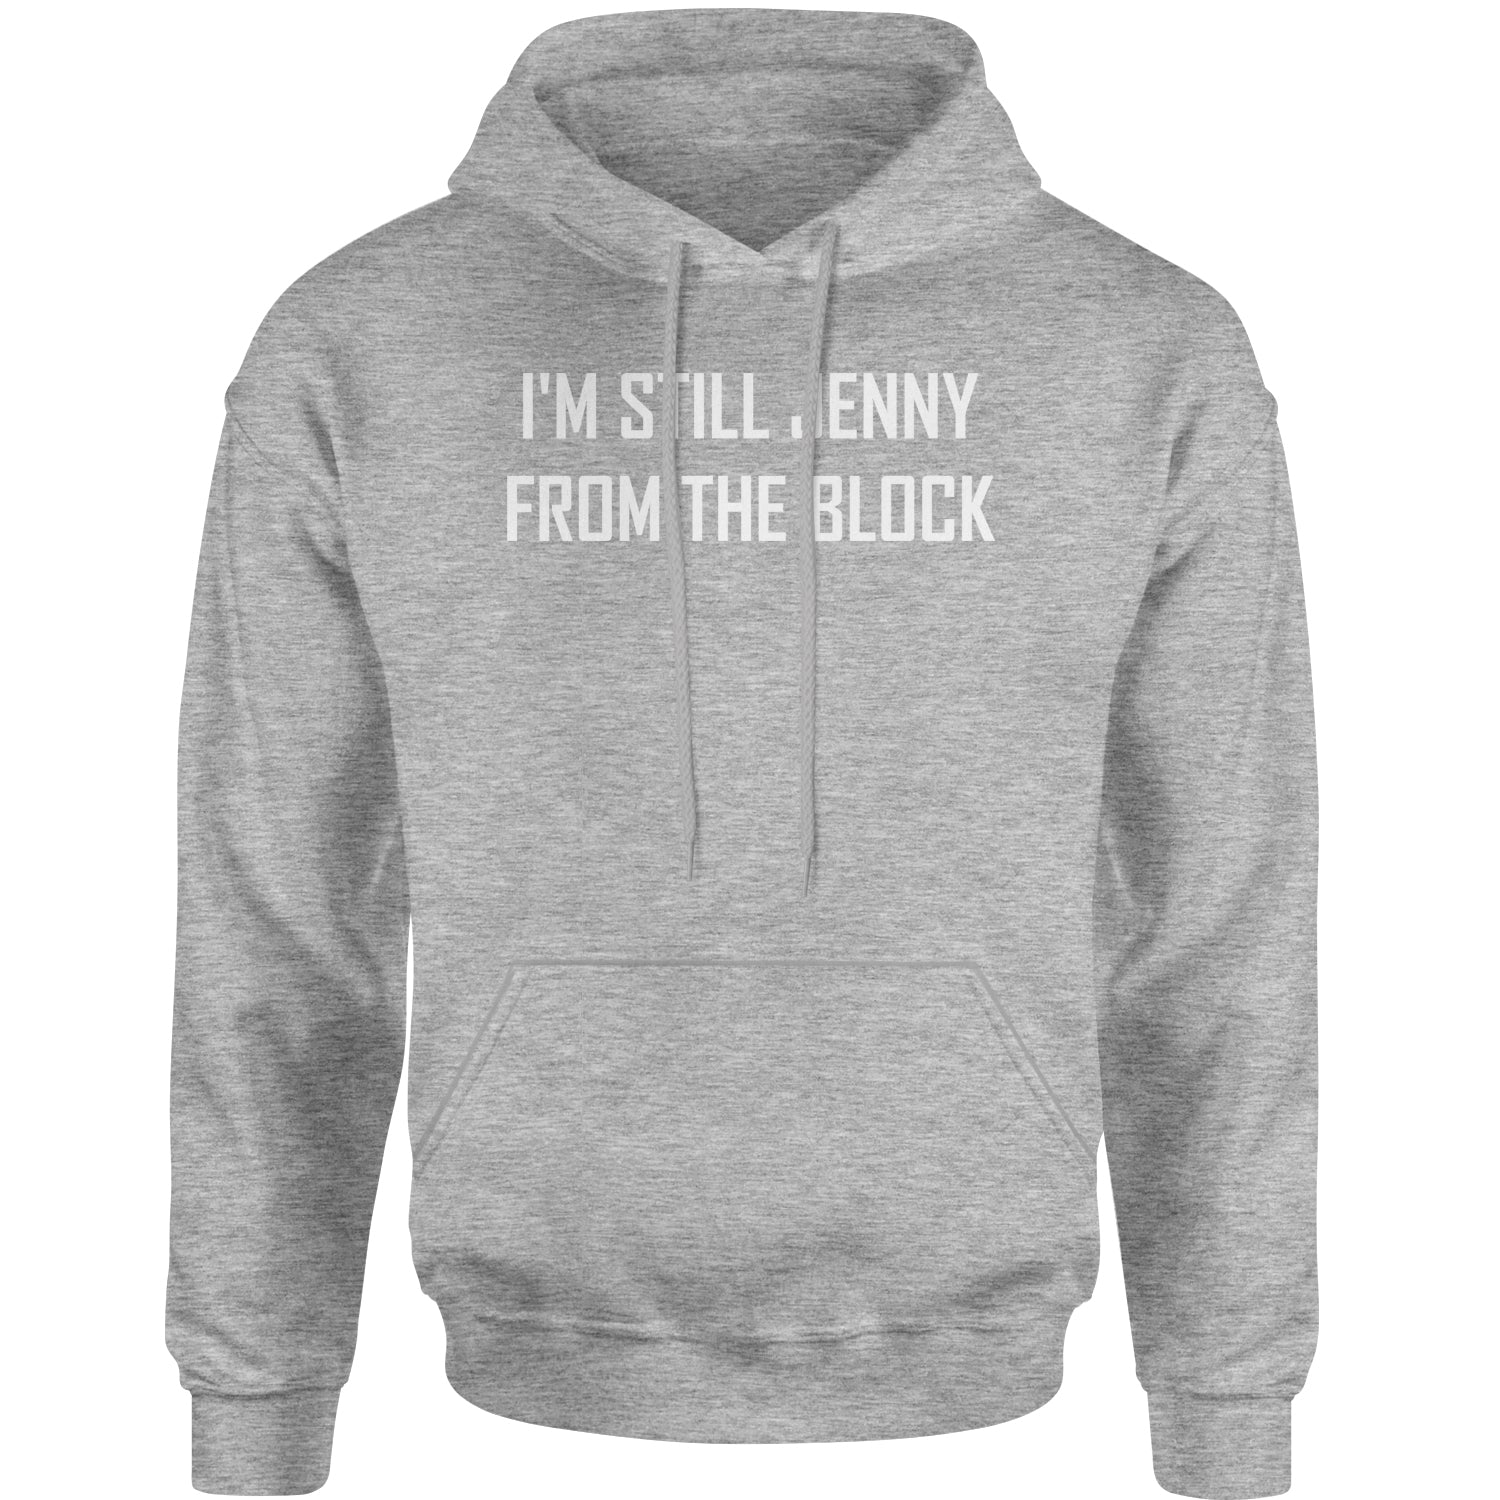 I'm Still Jenny From The Block Adult Hoodie Sweatshirt concert, jennifer, lopez, merch, tour by Expression Tees